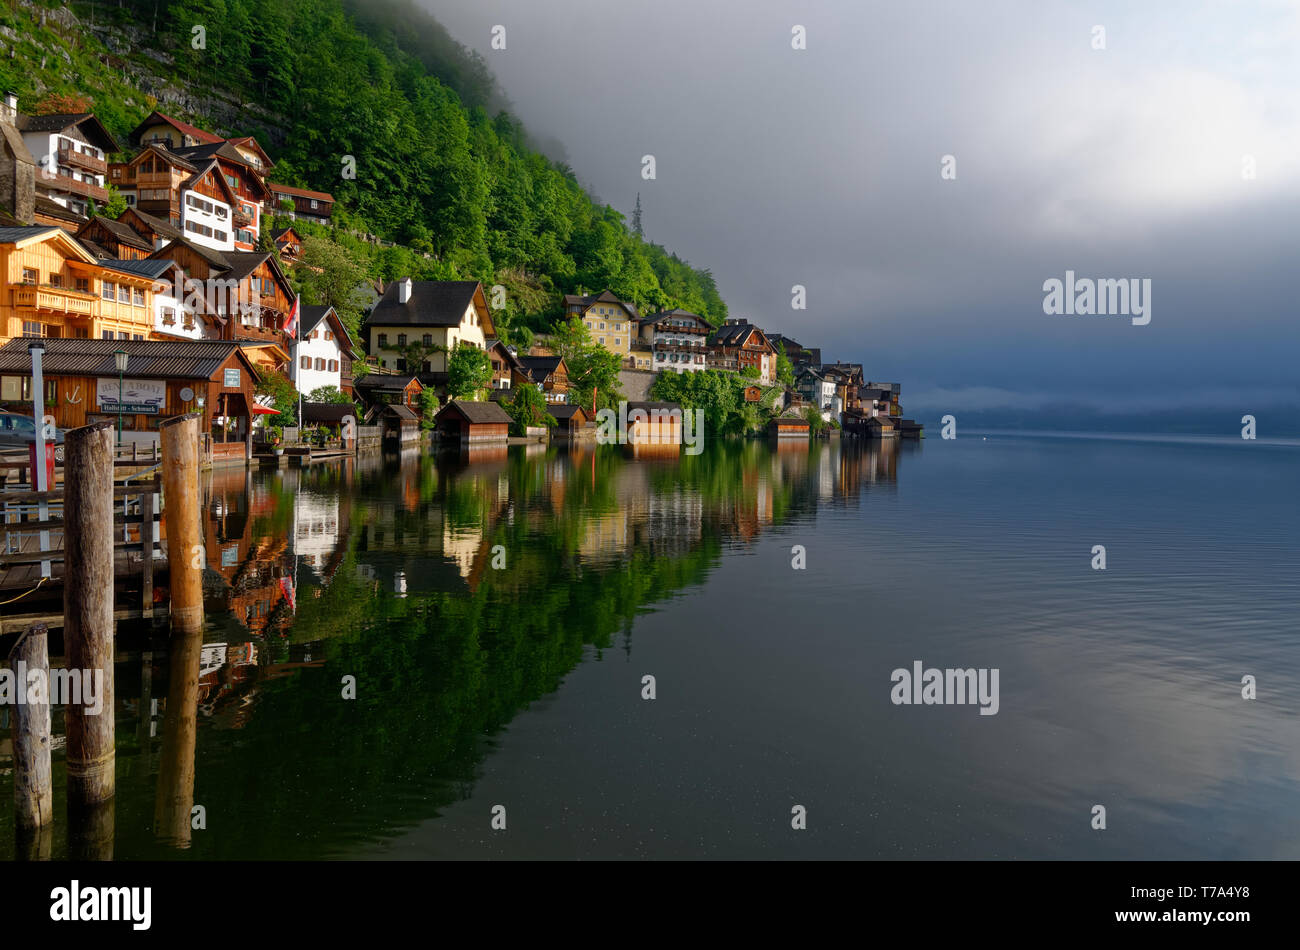 Early morning shot of Hallstatt houses and reflections in the water of Hallstatter See (Lake Hallstatt) with low cloud in the background Stock Photo